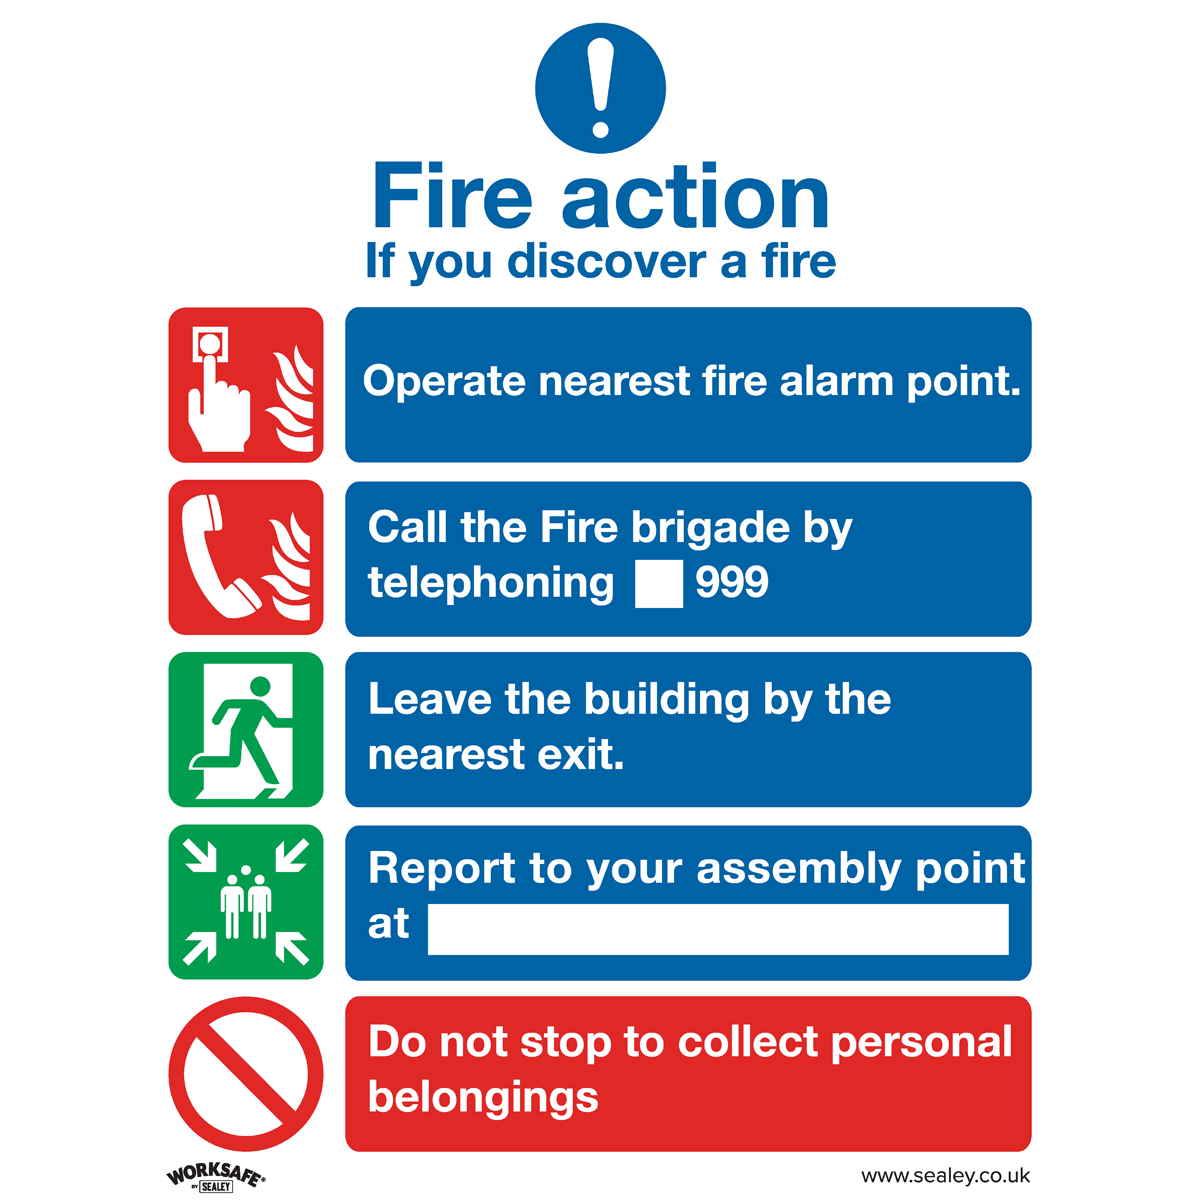 Safe Conditions Safety Sign - Fire Action Without Lift - Self-Adhesive Vinyl - SS20V1 - Farming Parts